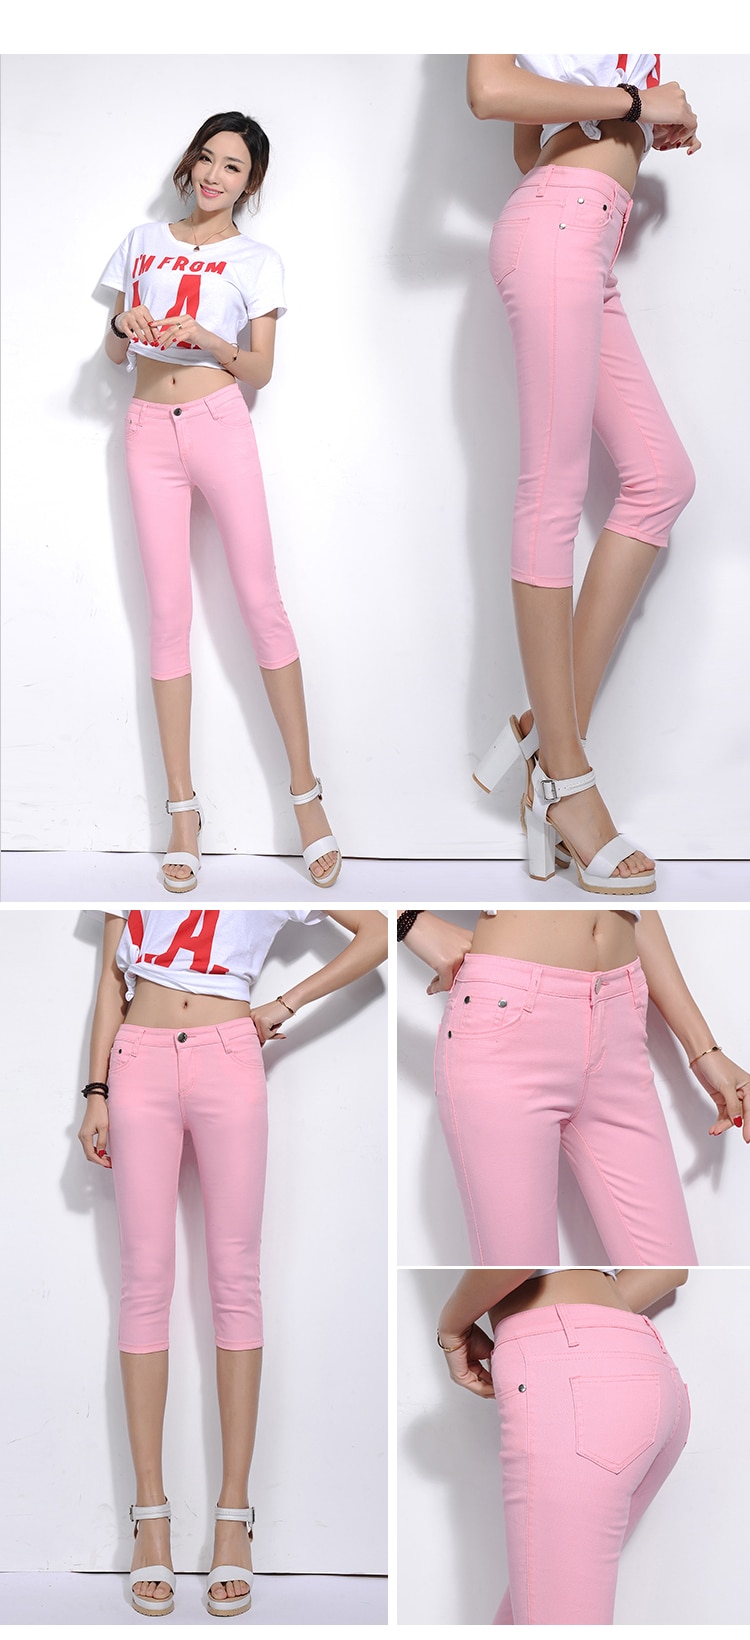 2018 New Spring Leisure Stretch Candy Color Cropped pants Female pencil pants Thin section Trousers Female feet Breeches (12)